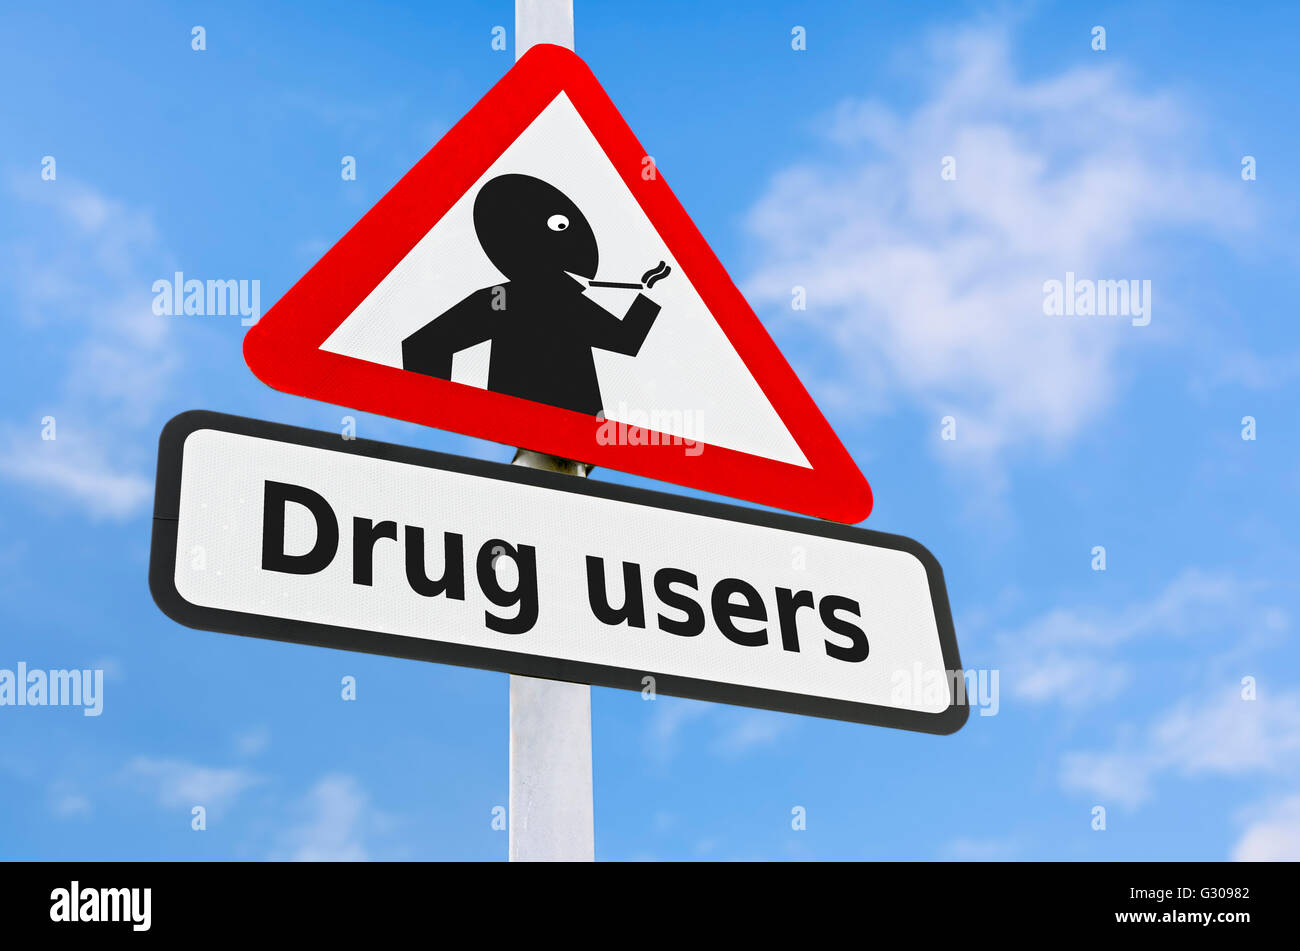 Drug users triangular warning sign against blue sky. Stock Photo